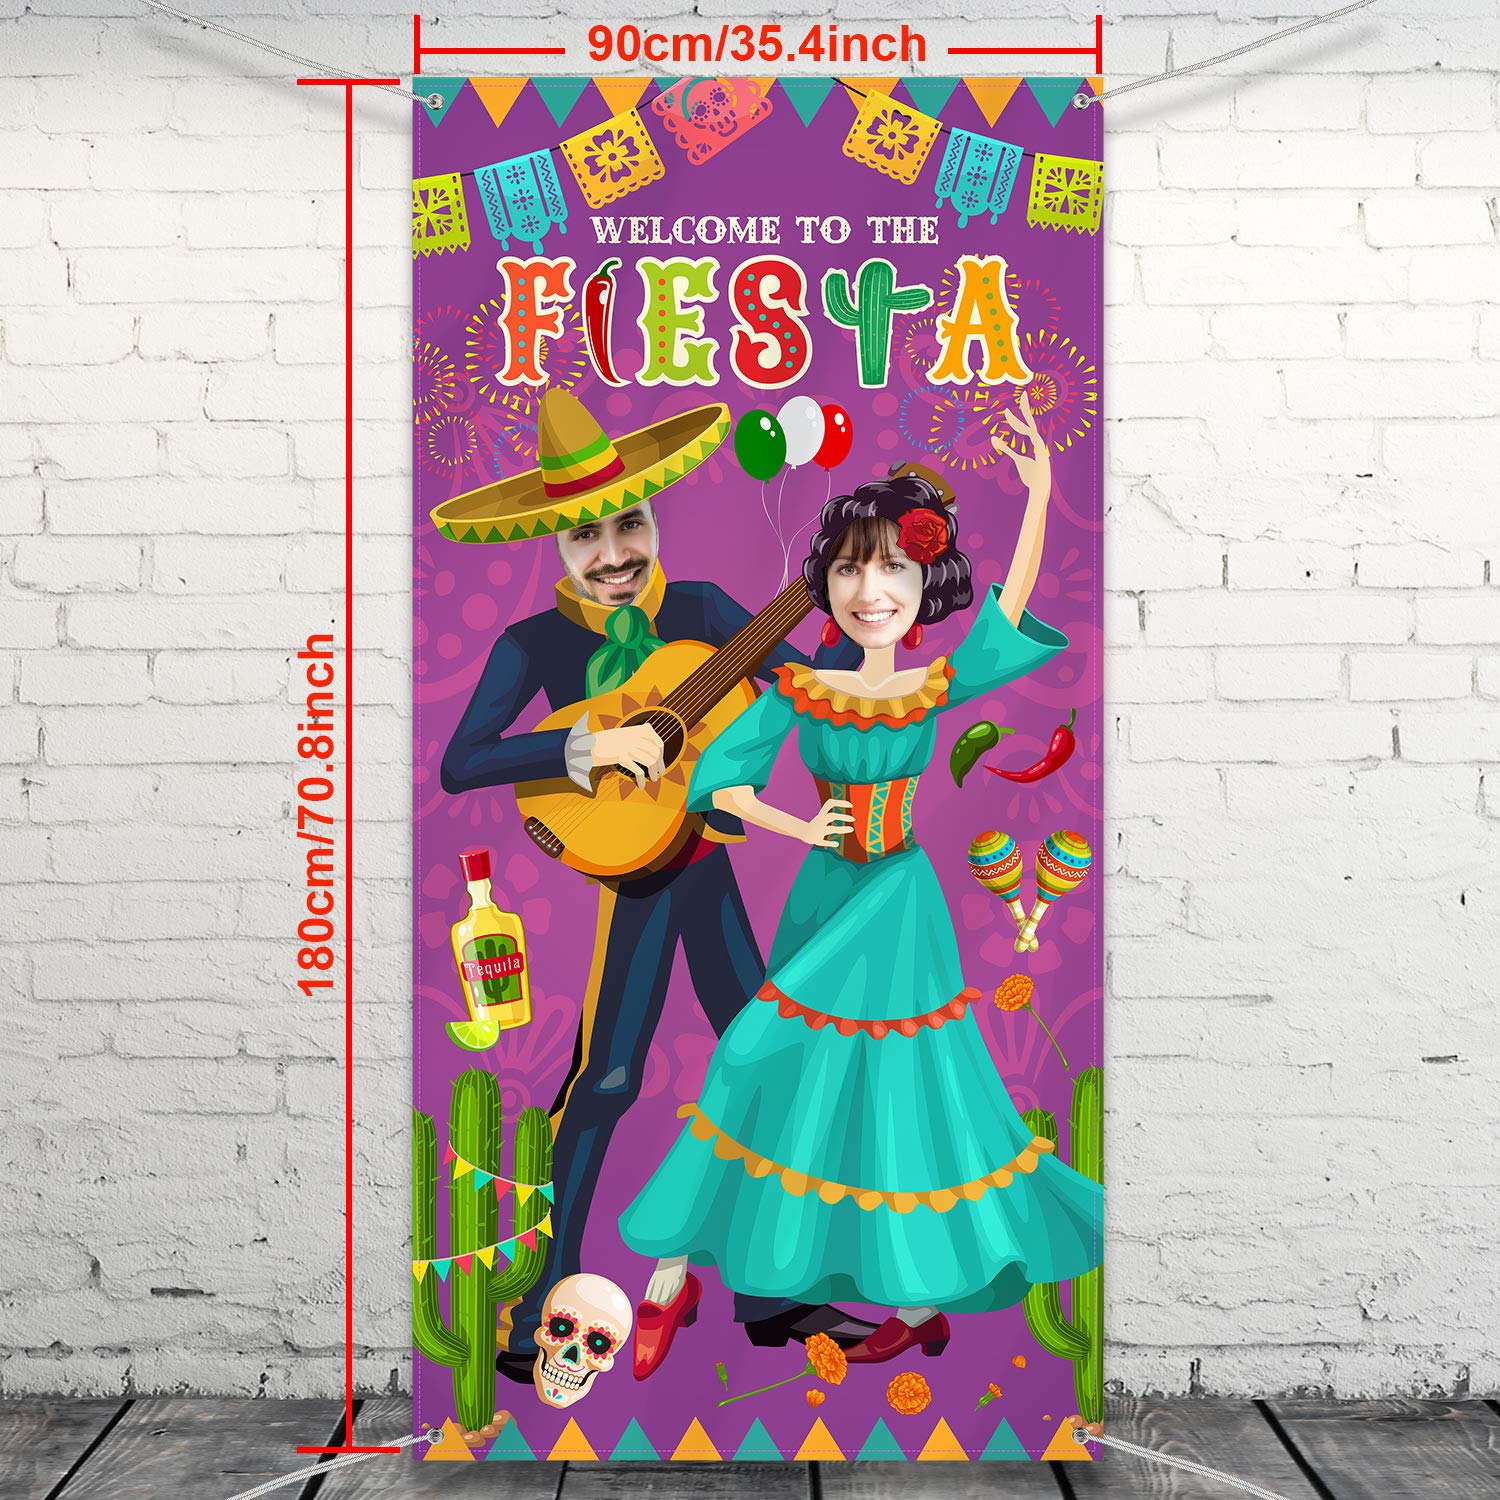 Fiesta Couple Photo Door Banner, Giant Fabric Fiesta Photo Booth Background, Funny Fiesta Games Supplies for Mexican Theme Festival, 6 x 3 ft